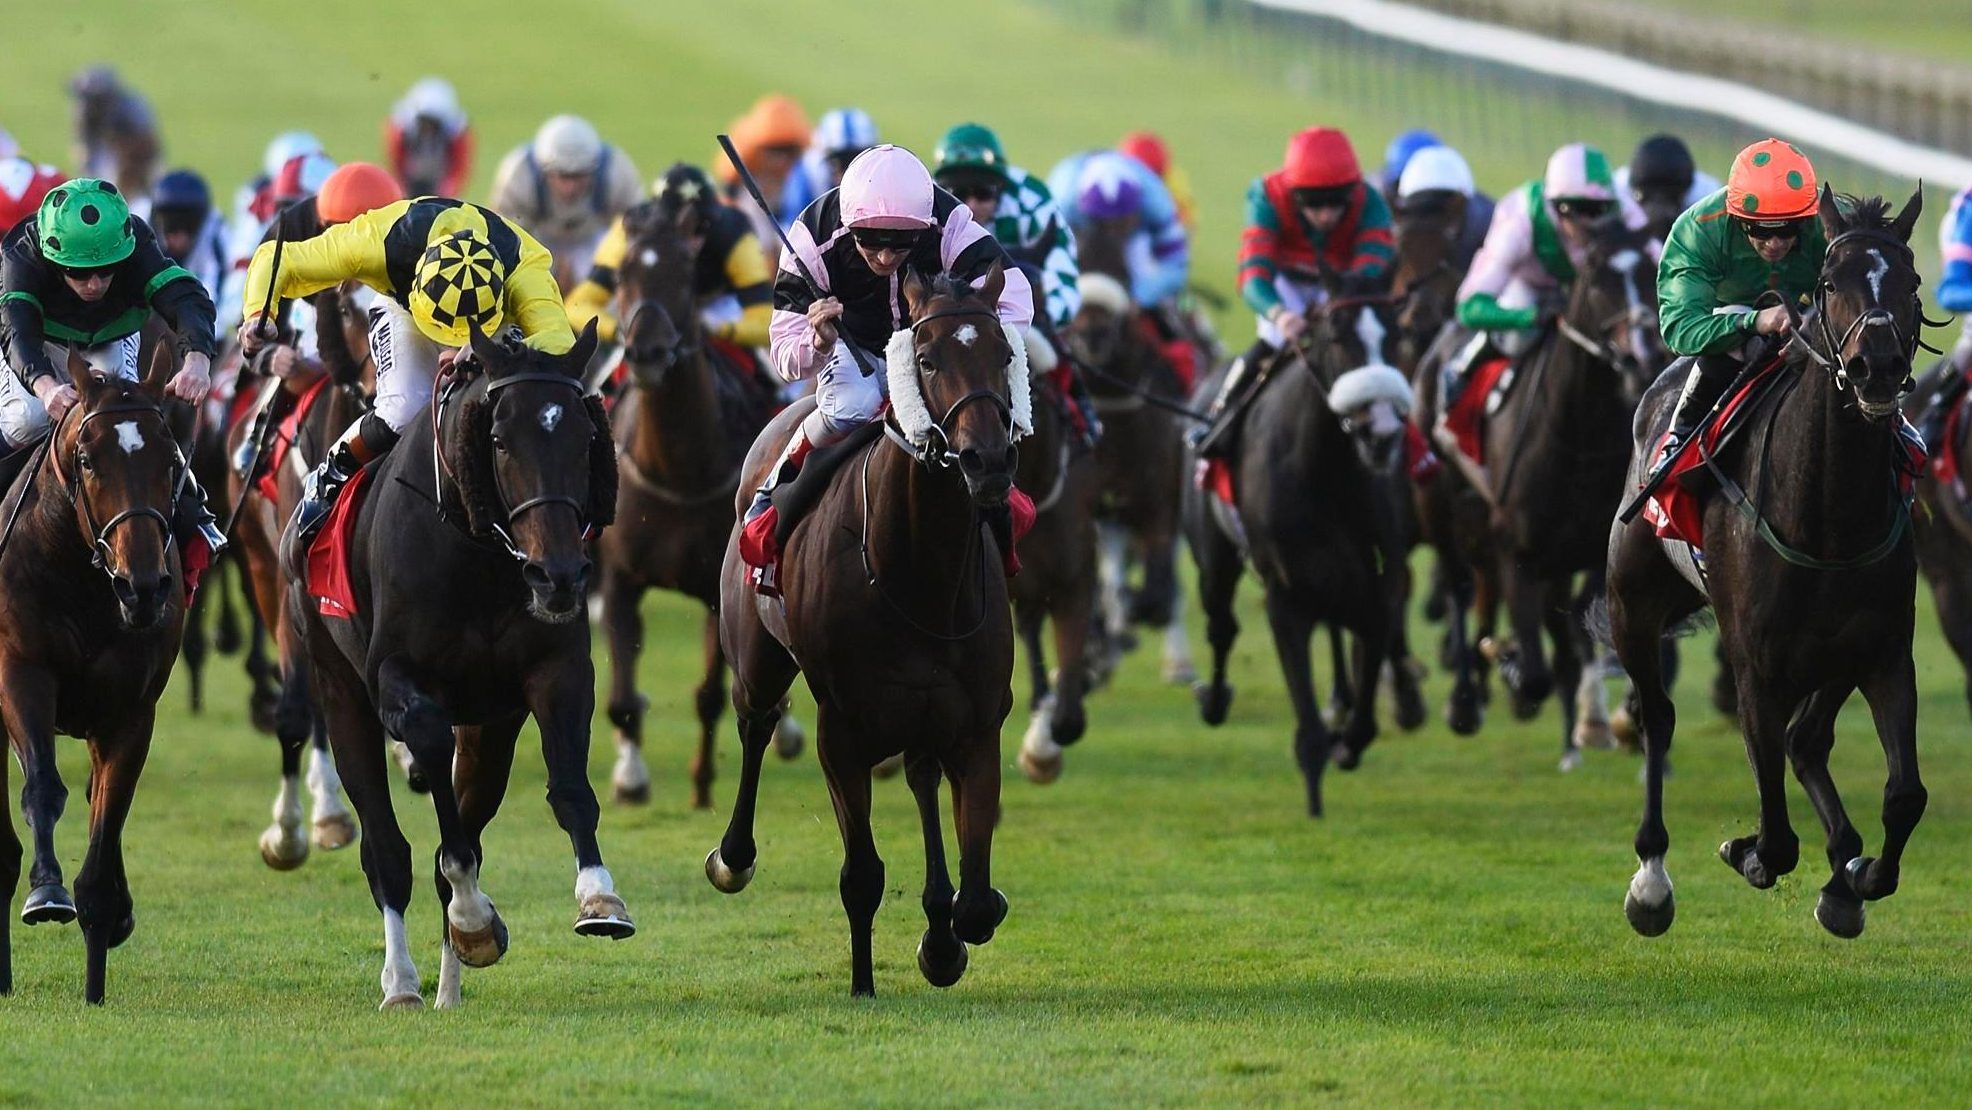 A Review For Our Next Horse Race Of Interest On Betfair